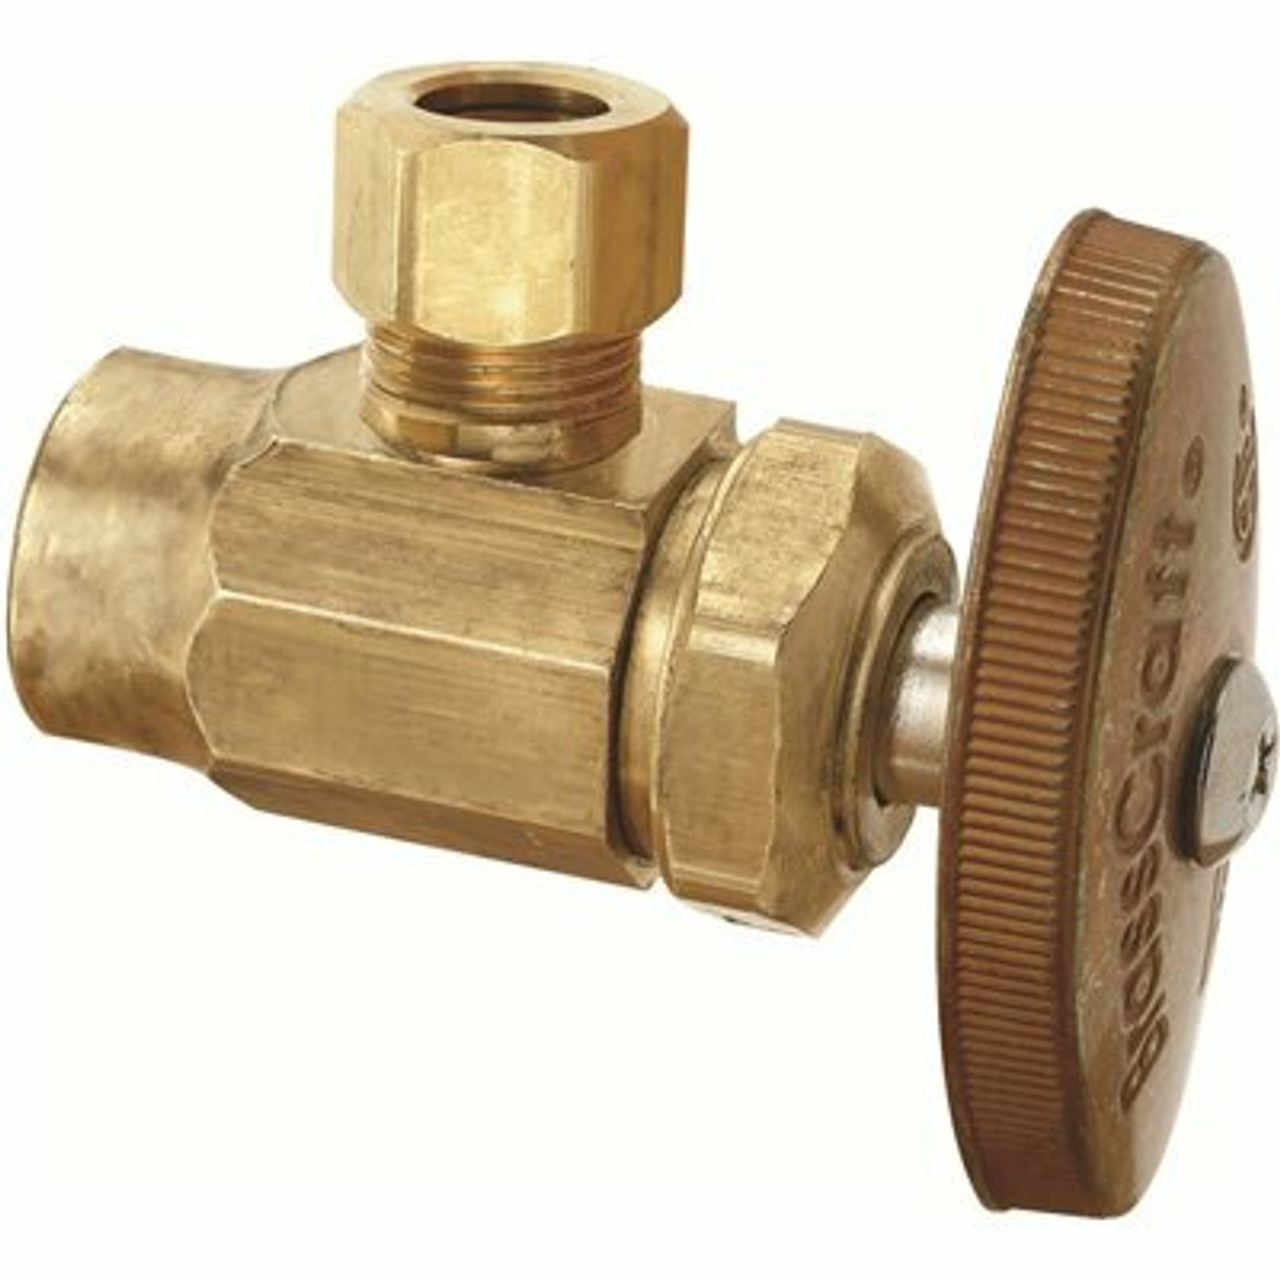 Brasscraft 1/2 In. Nominal Sweat Inlet X 3/8 In. O.D. Compression Outlet Brass Multi-Turn Angle Valve In Rough Brass